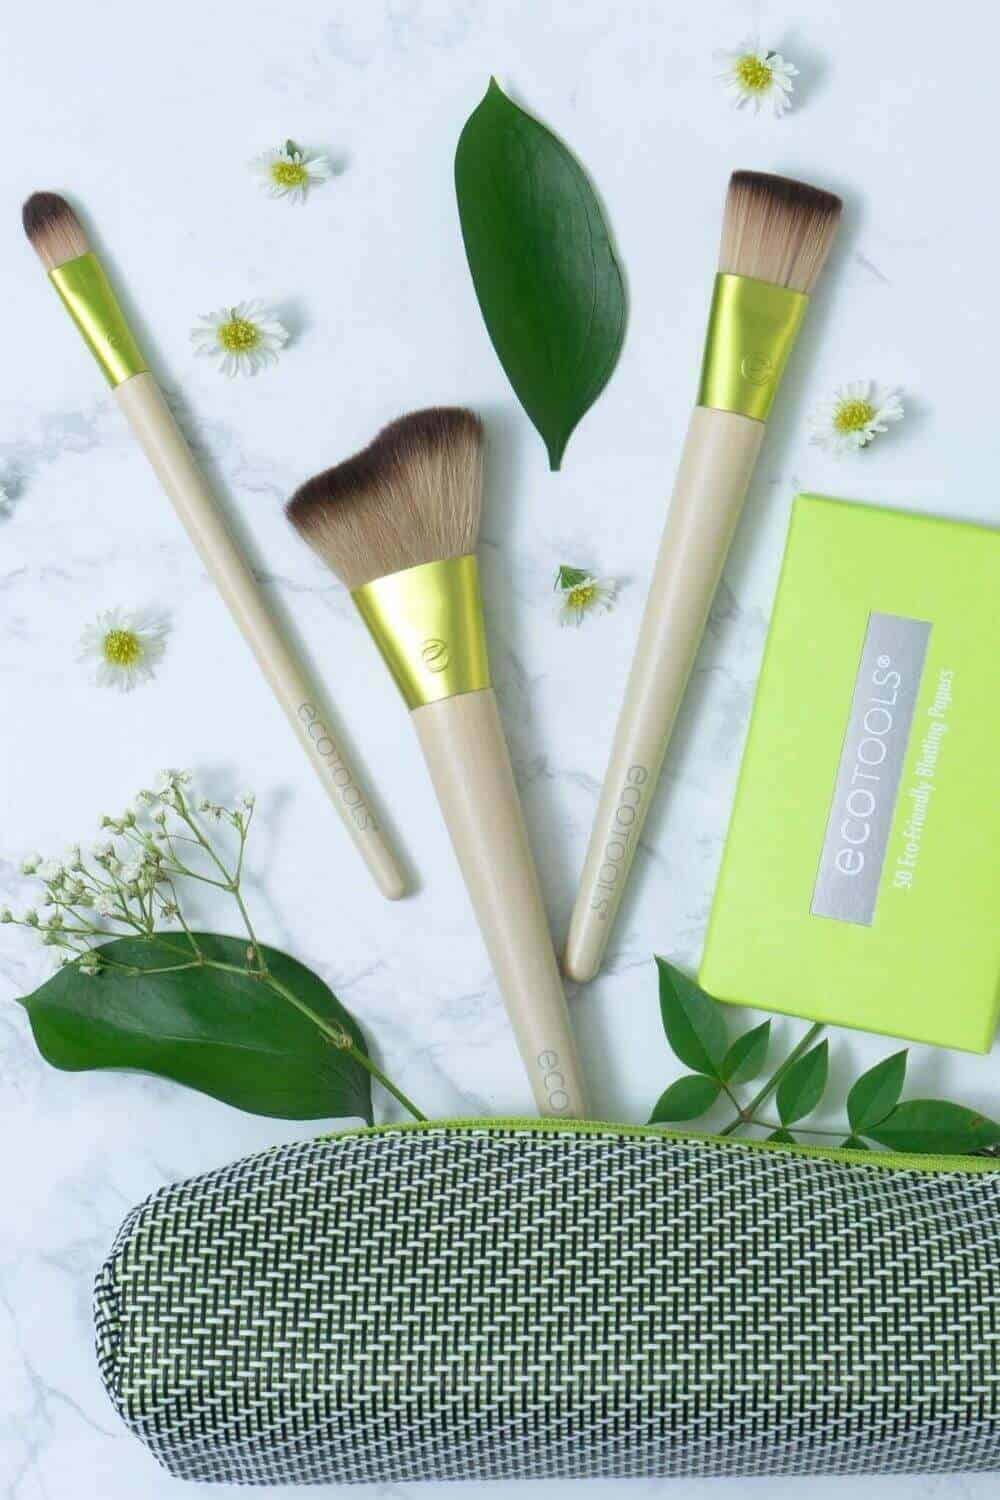 We’ve sought out the best cruelty free vegan makeup brushes to give you the tools (literally) to make your ENTIRE makeup routine absent the animals. Image by Eco Tools #veganmakeupbrushes #sustainablejungle